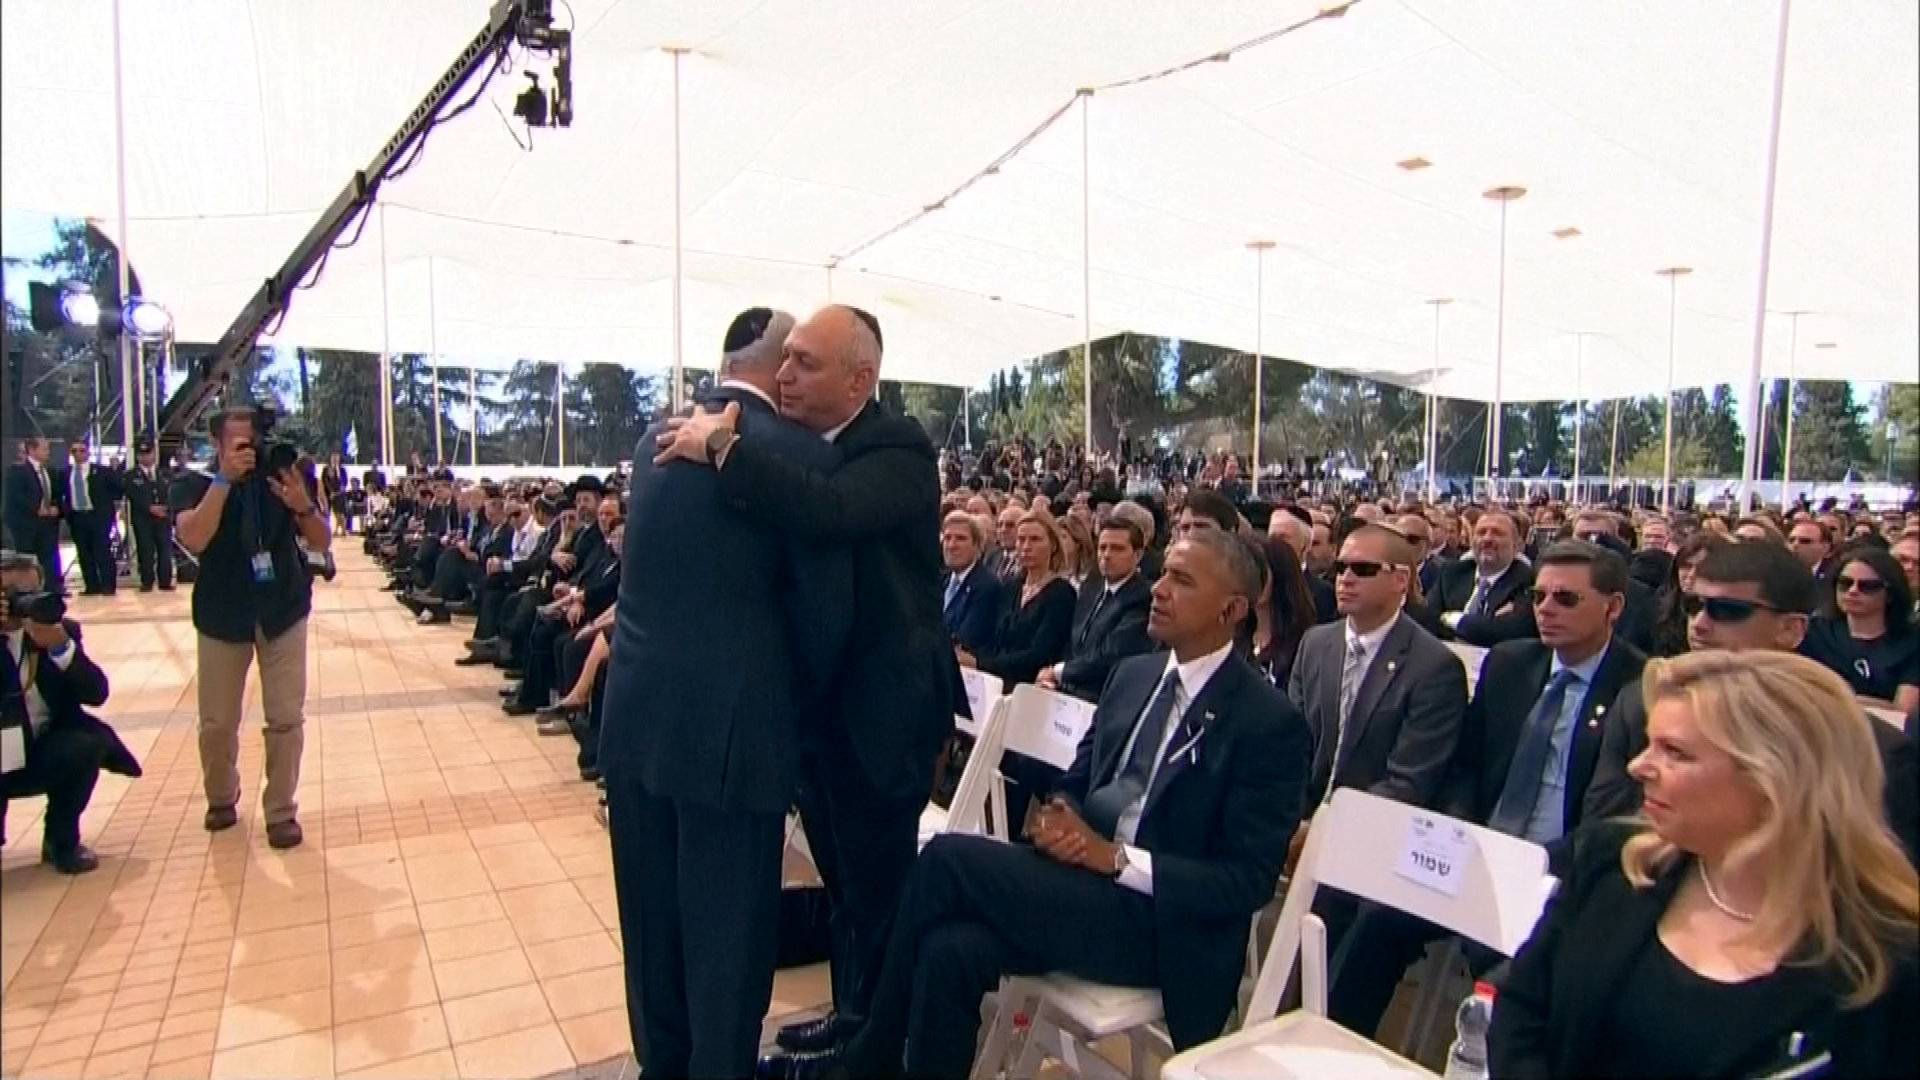  A still image from a video shows Israel's PM Netanyahu embracing Chemi Peres, the son former Israeli President Shimon Peres, at the funeral in Jerusalem 